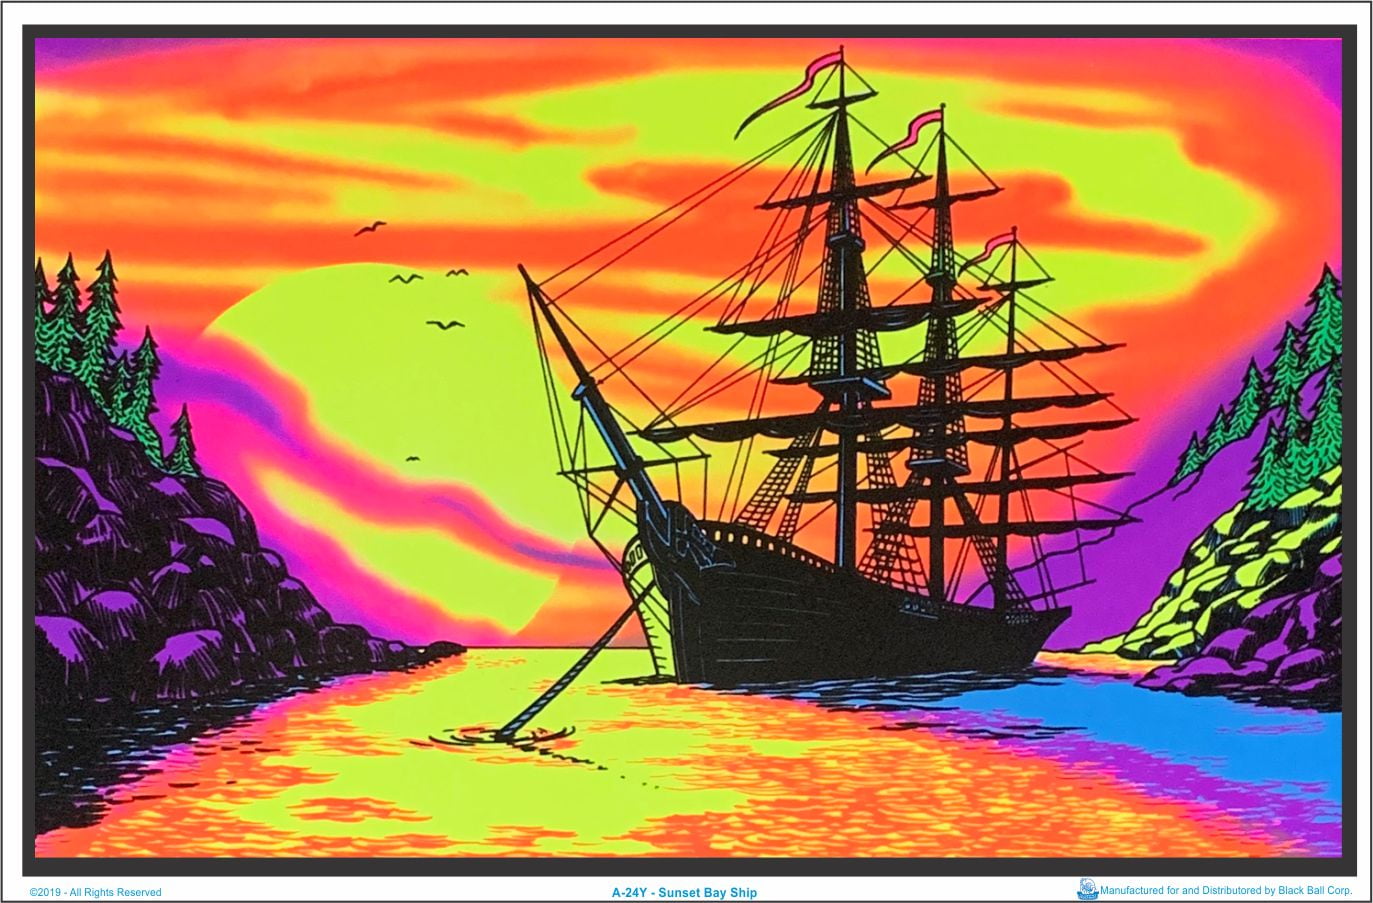 Moonlit Pirate Ghost Ship Blacklight Poster 23 x 35 